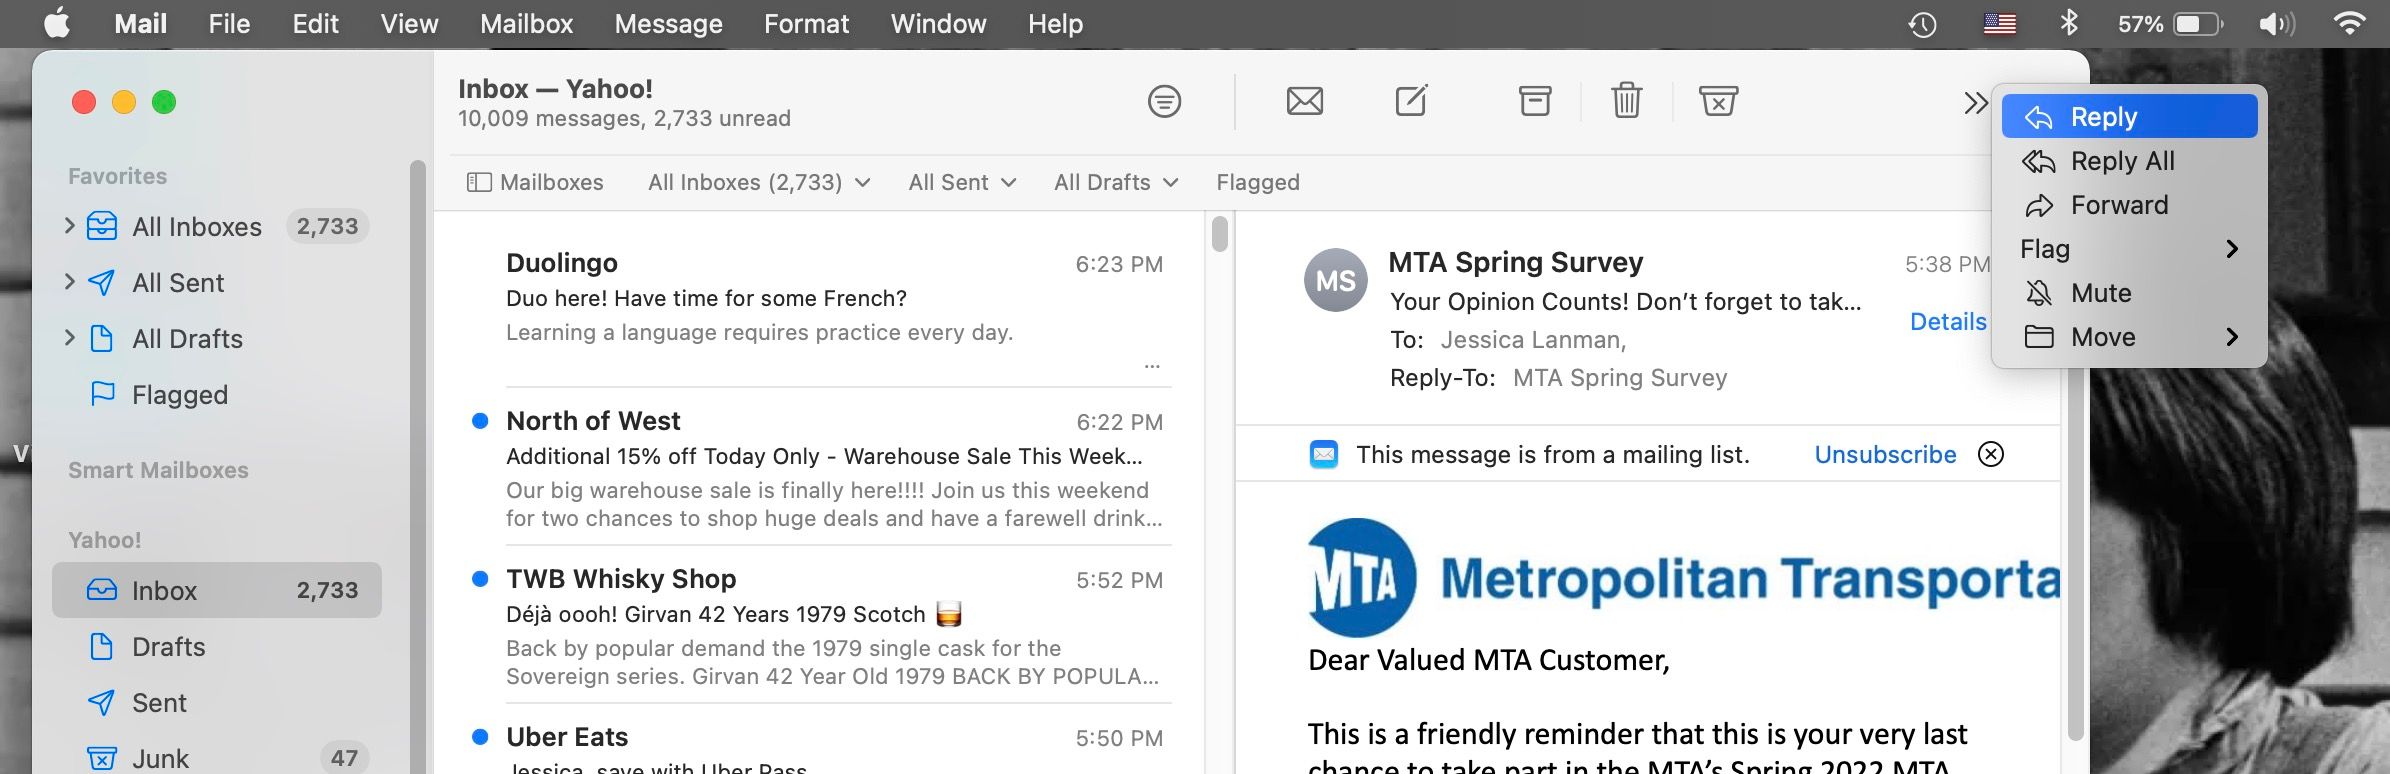 Reply and Forward options on display in Mail for Mac